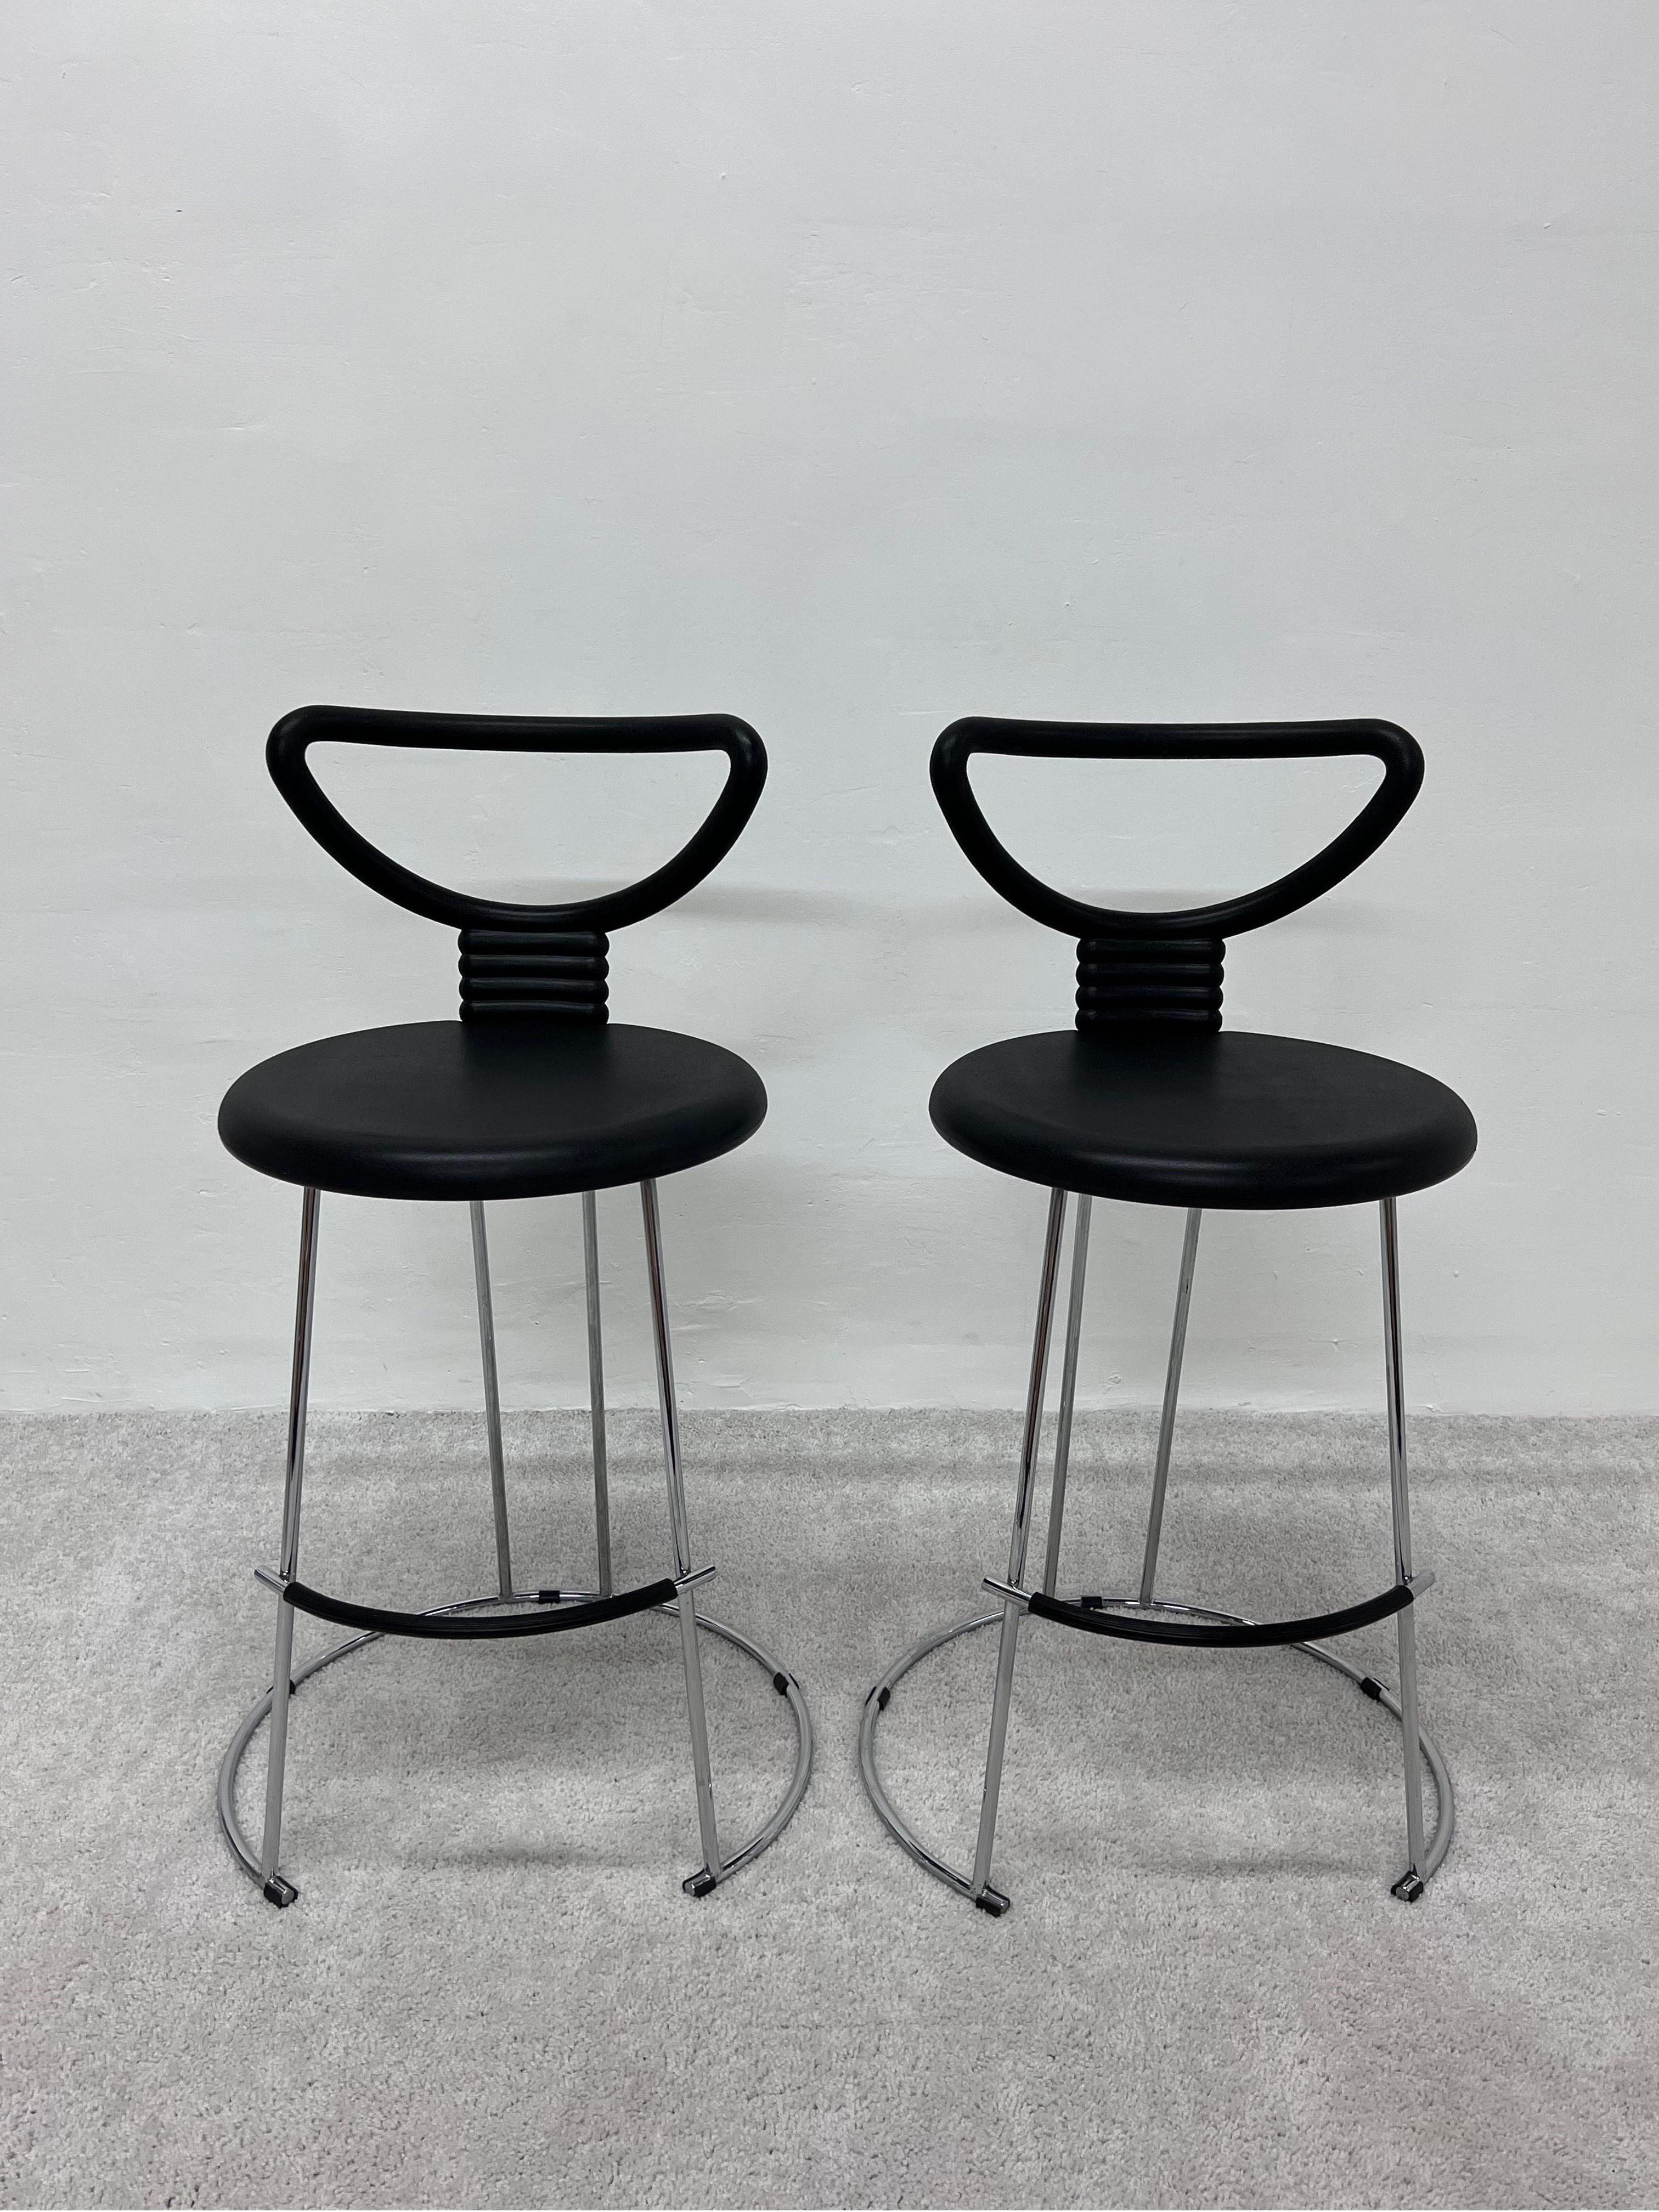 Pair of Nardis counter height stools with rubber like seats on a polished chrome frame designed by Nobu Tanigawa for Fasem Italy.